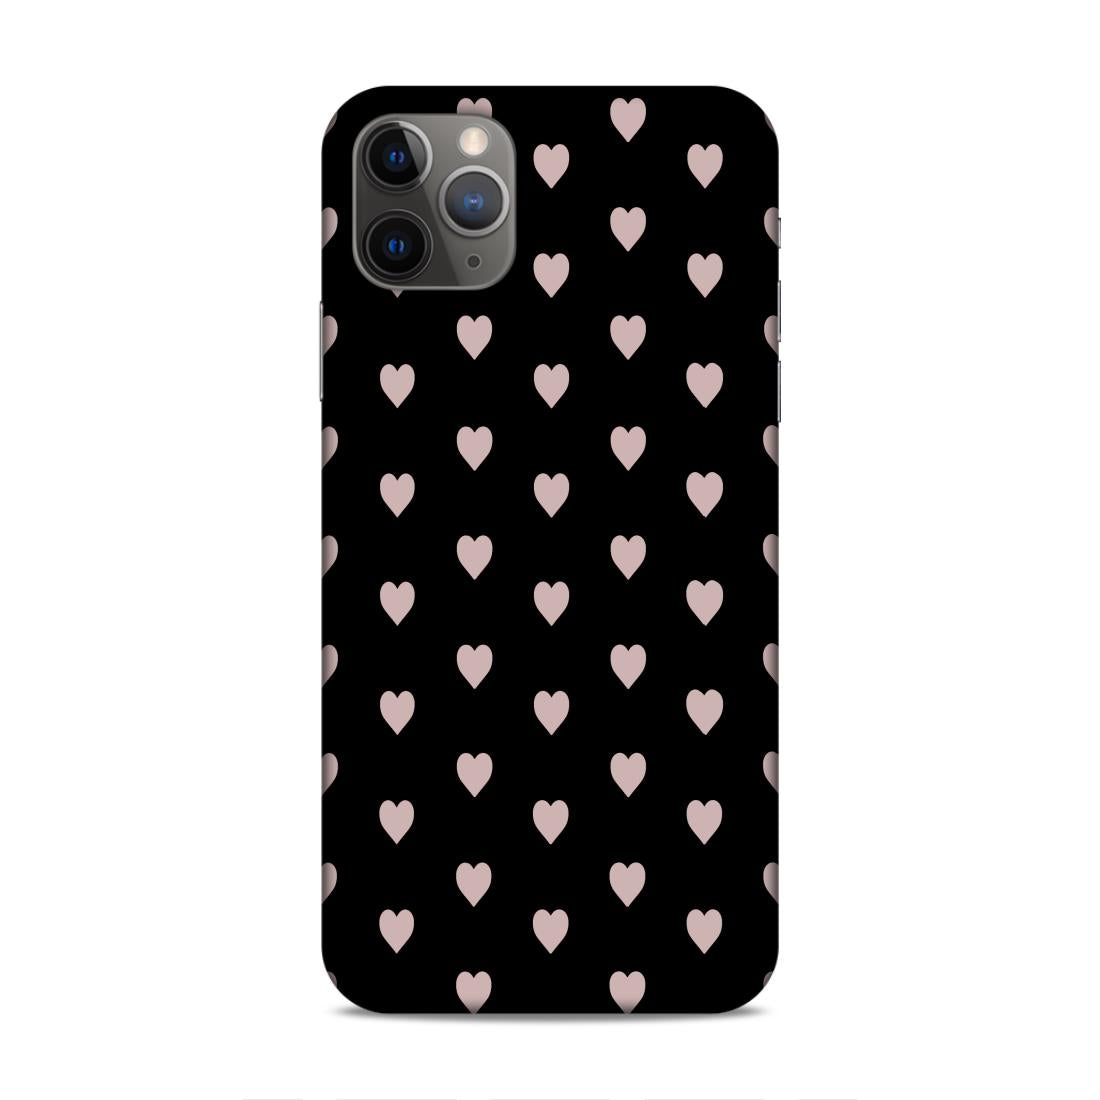 Love Pattern Hard Back Case For Apple iPhone 11 Pro Max